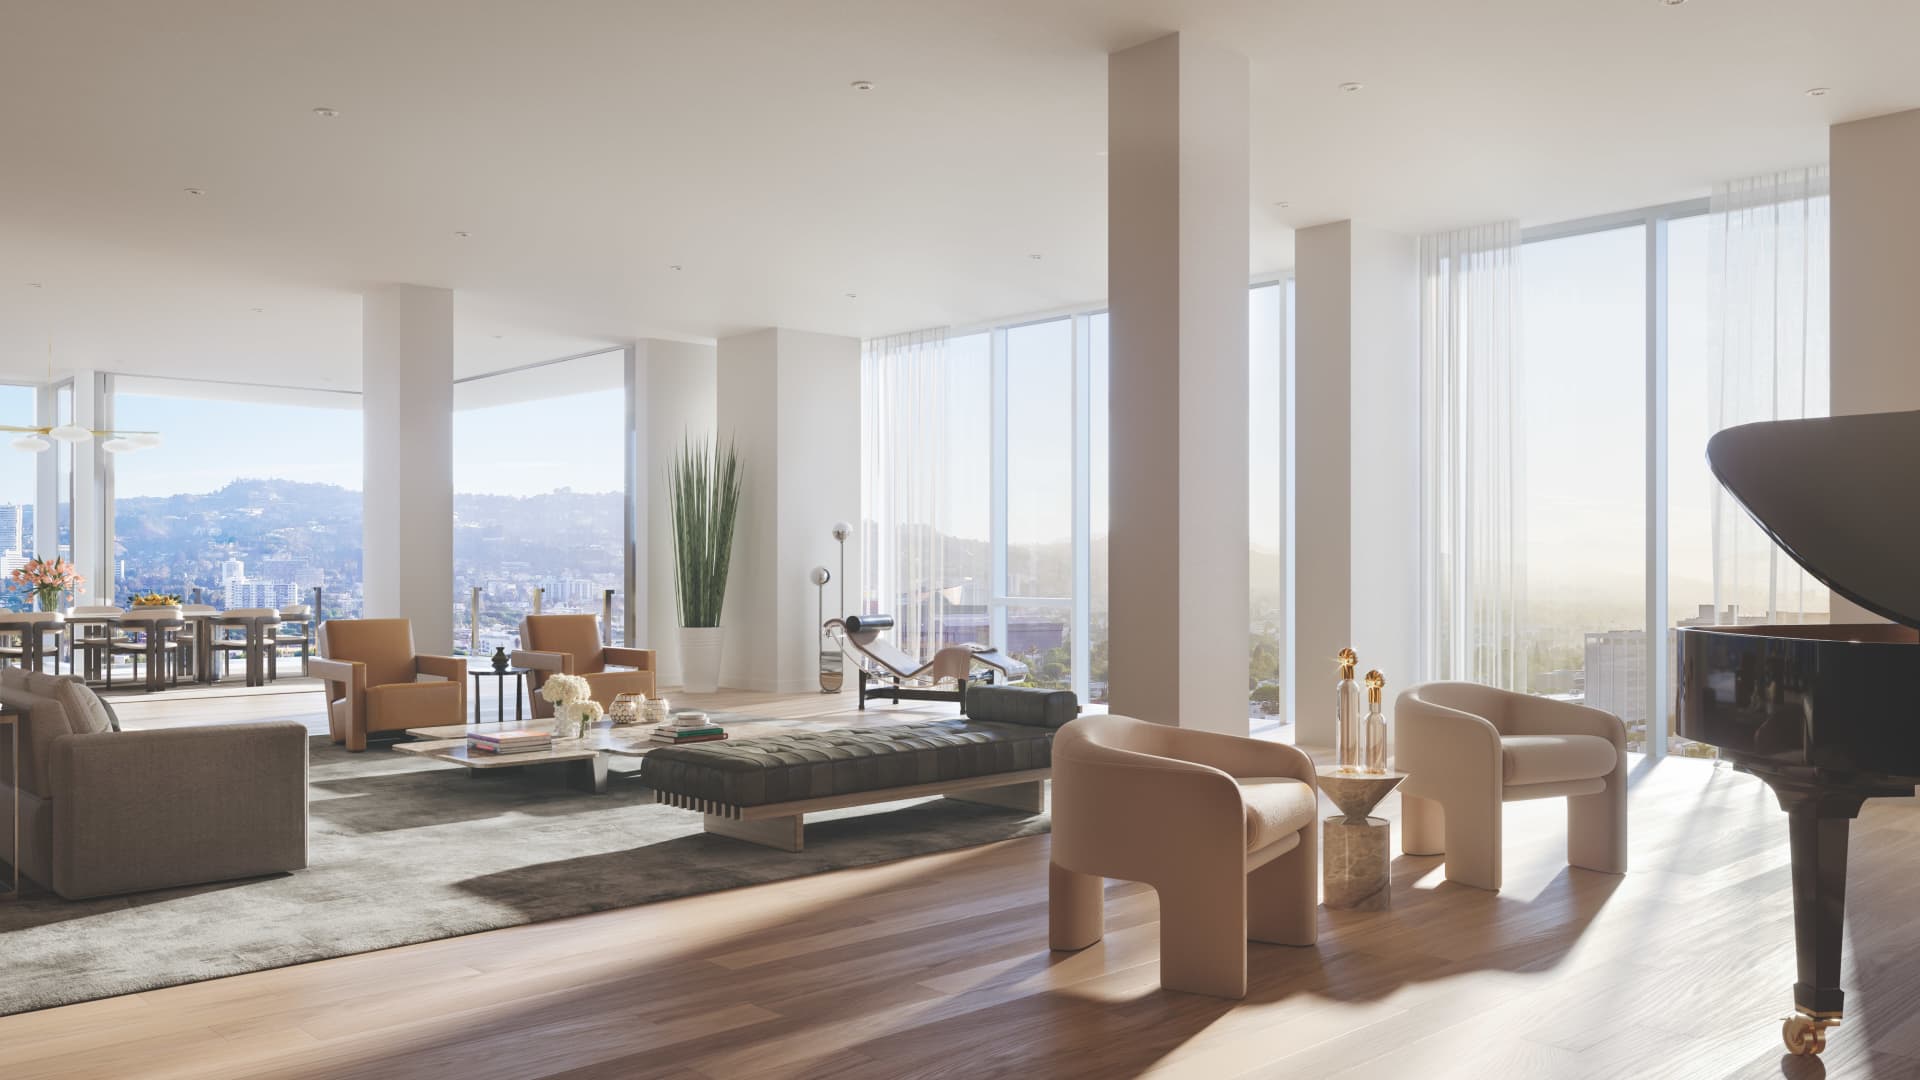 Rendering depicting the finished penthouse atop the Four Seasons Residences Los Angeles.